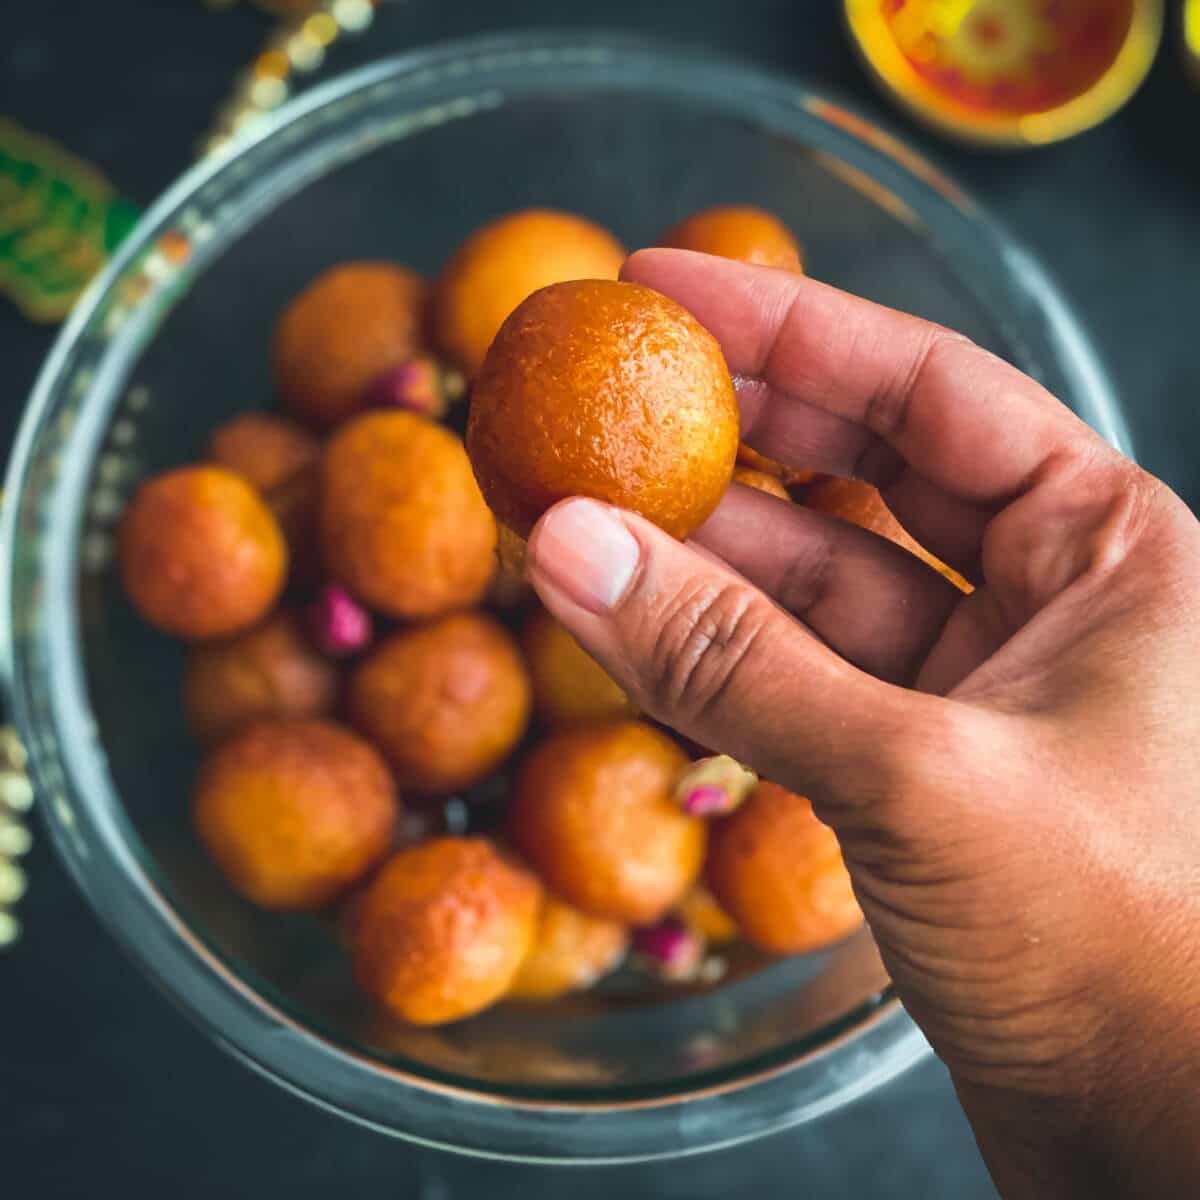 A hand holding a ball of gulab jamun over a glass bowl filled with gulab jamun balls.